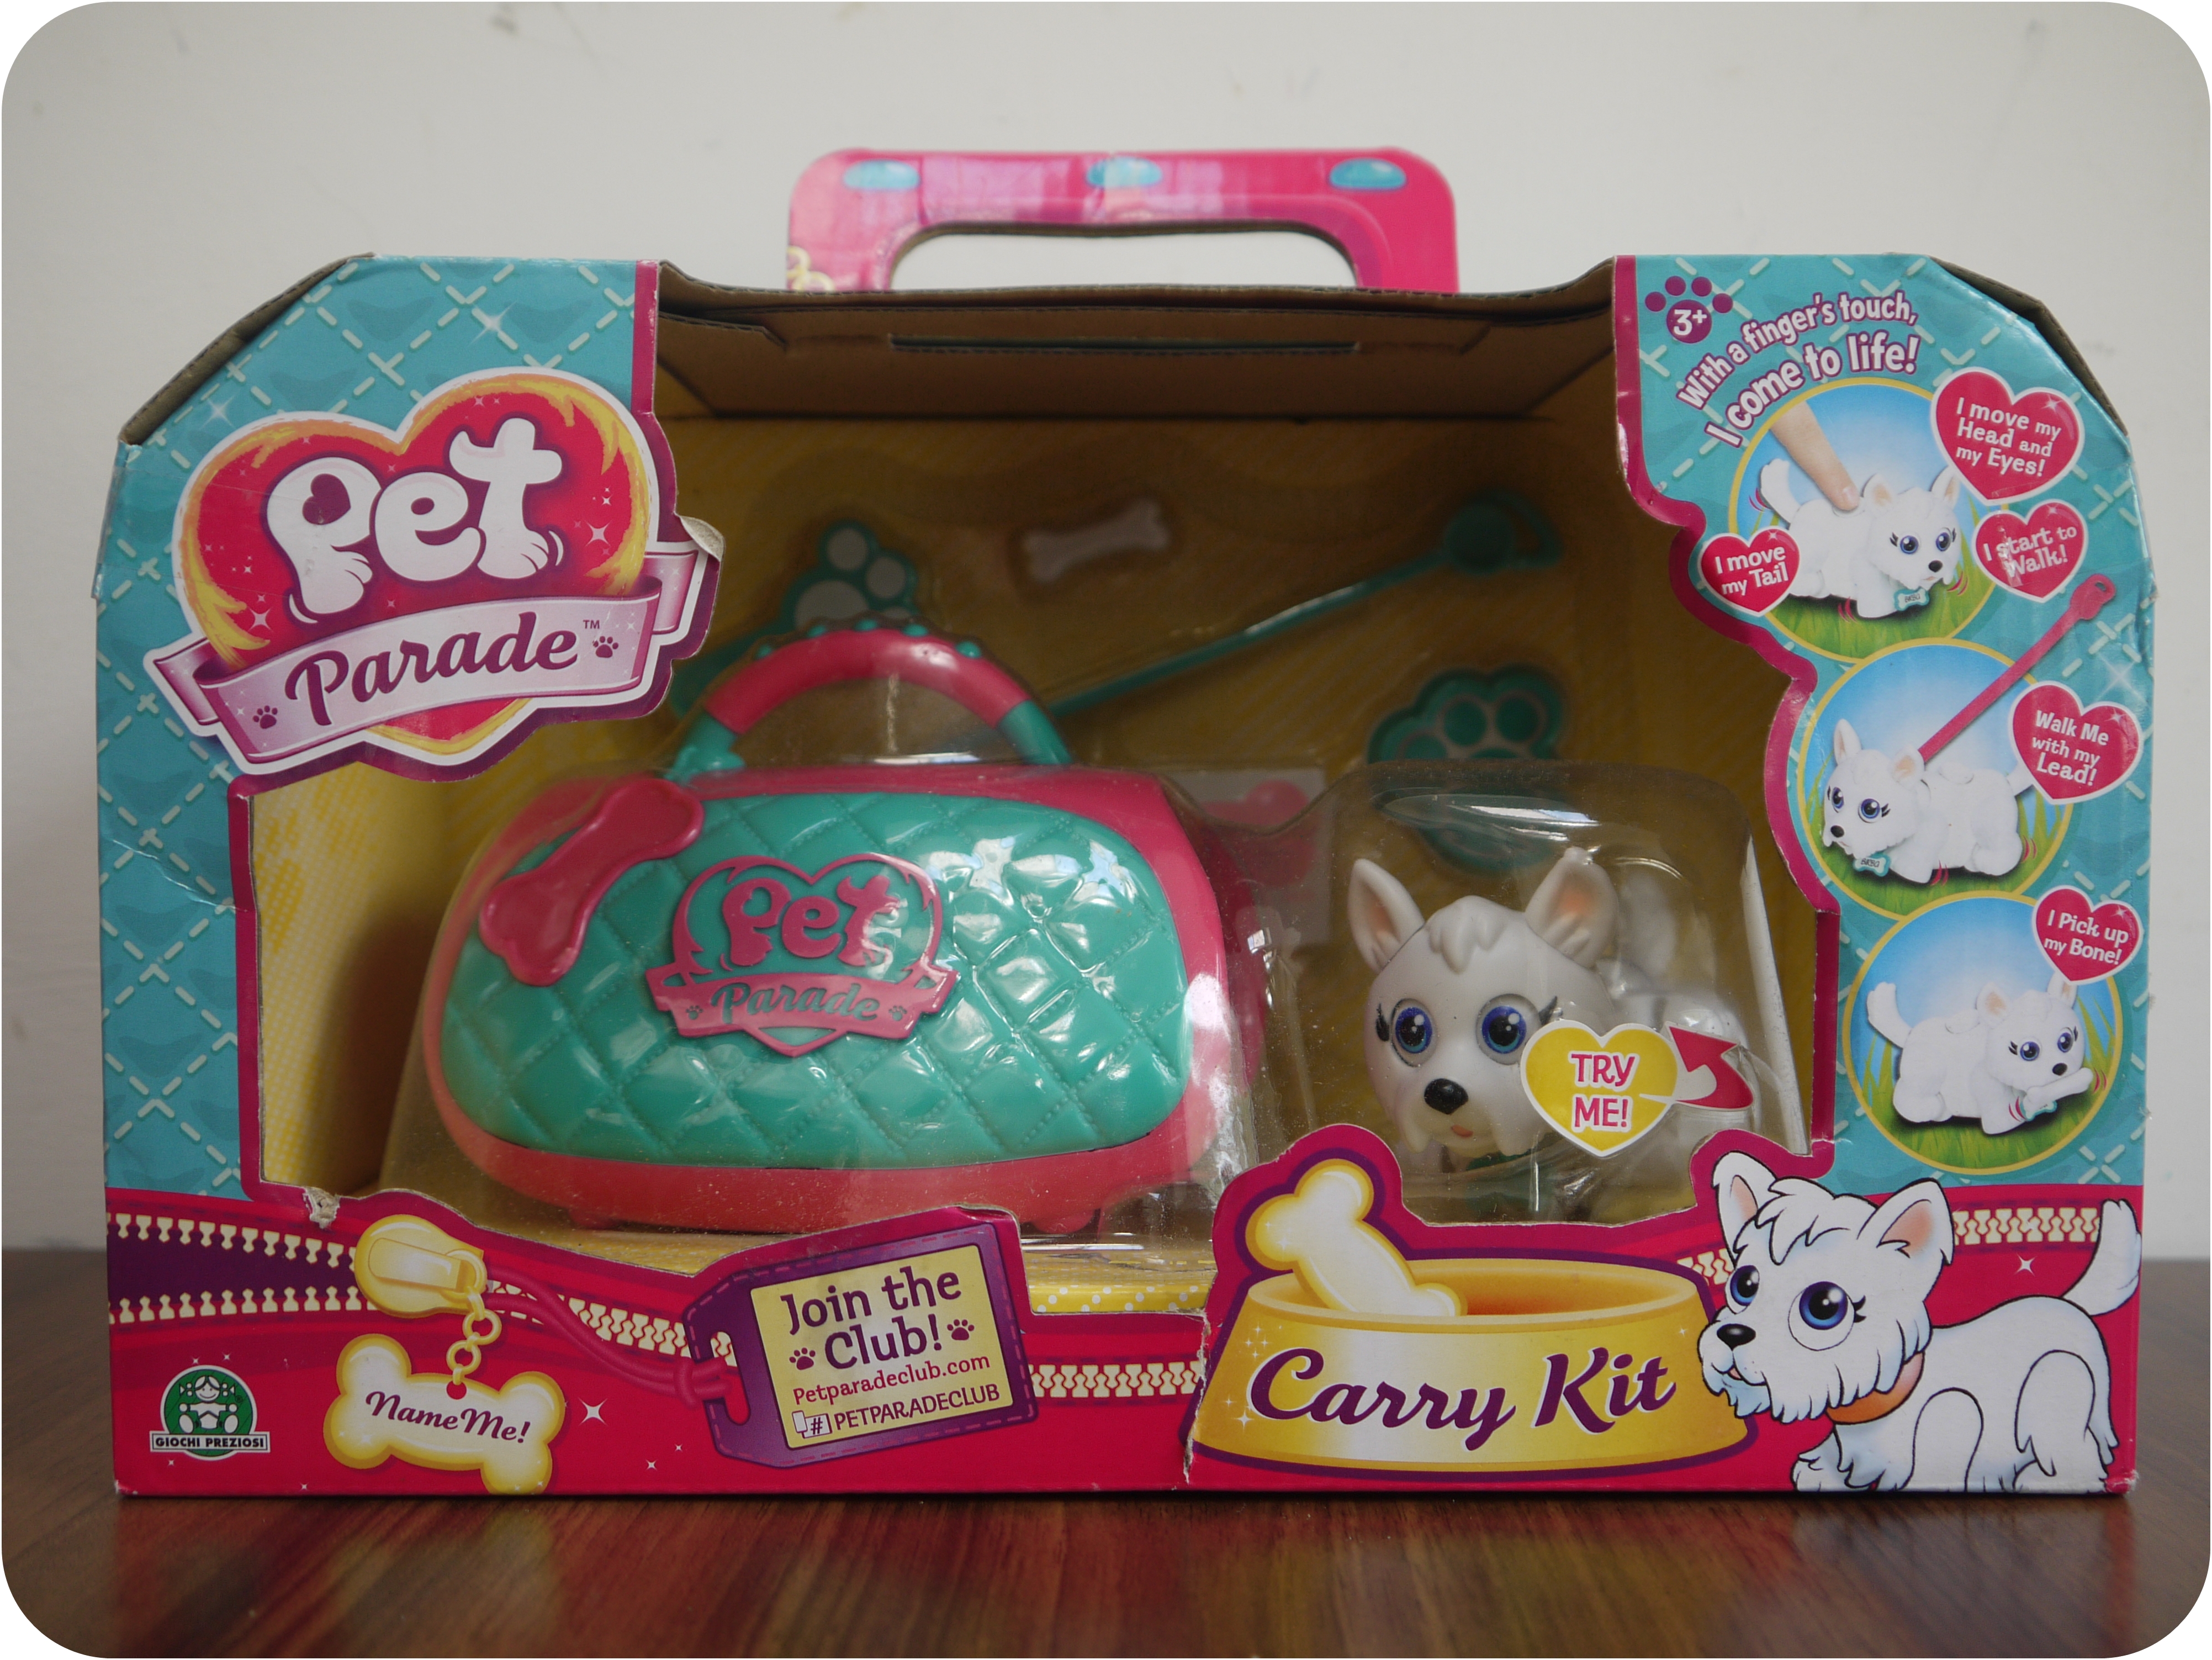 Pet Parade Carry Kit from Flair Plc – Review